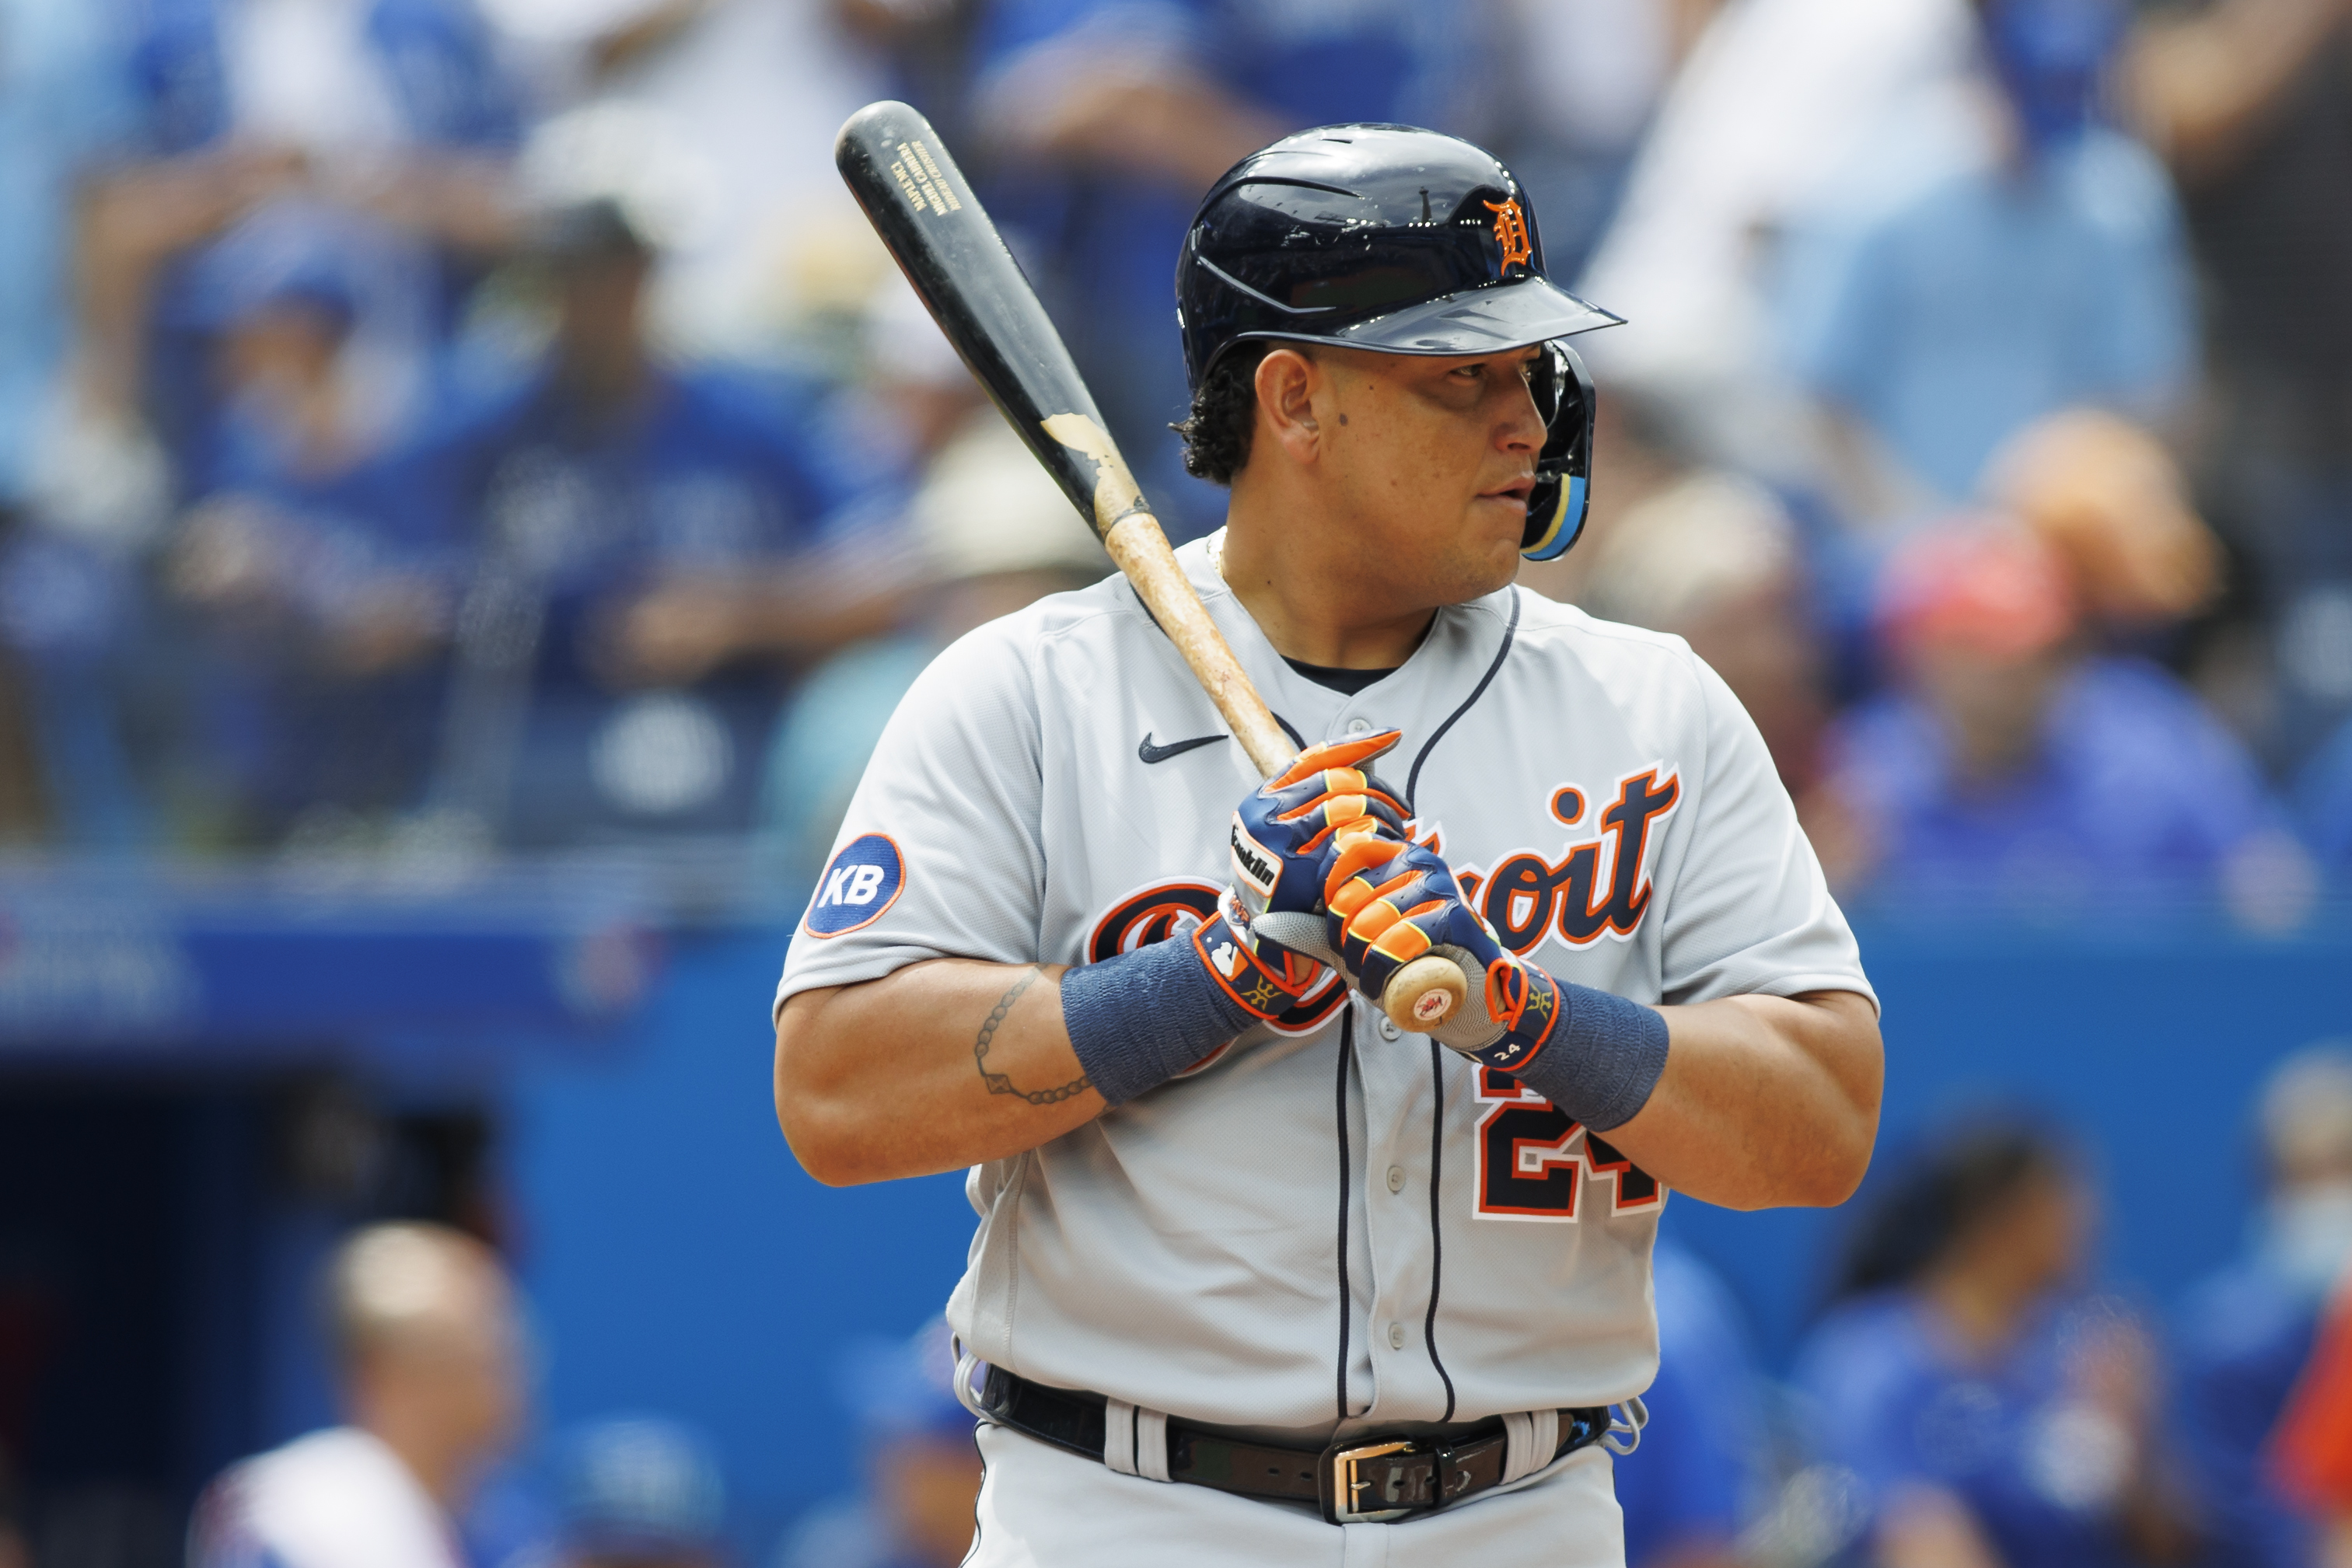 Miguel Cabrera still chasing 3,000 hits, goes 0-3 with a walk